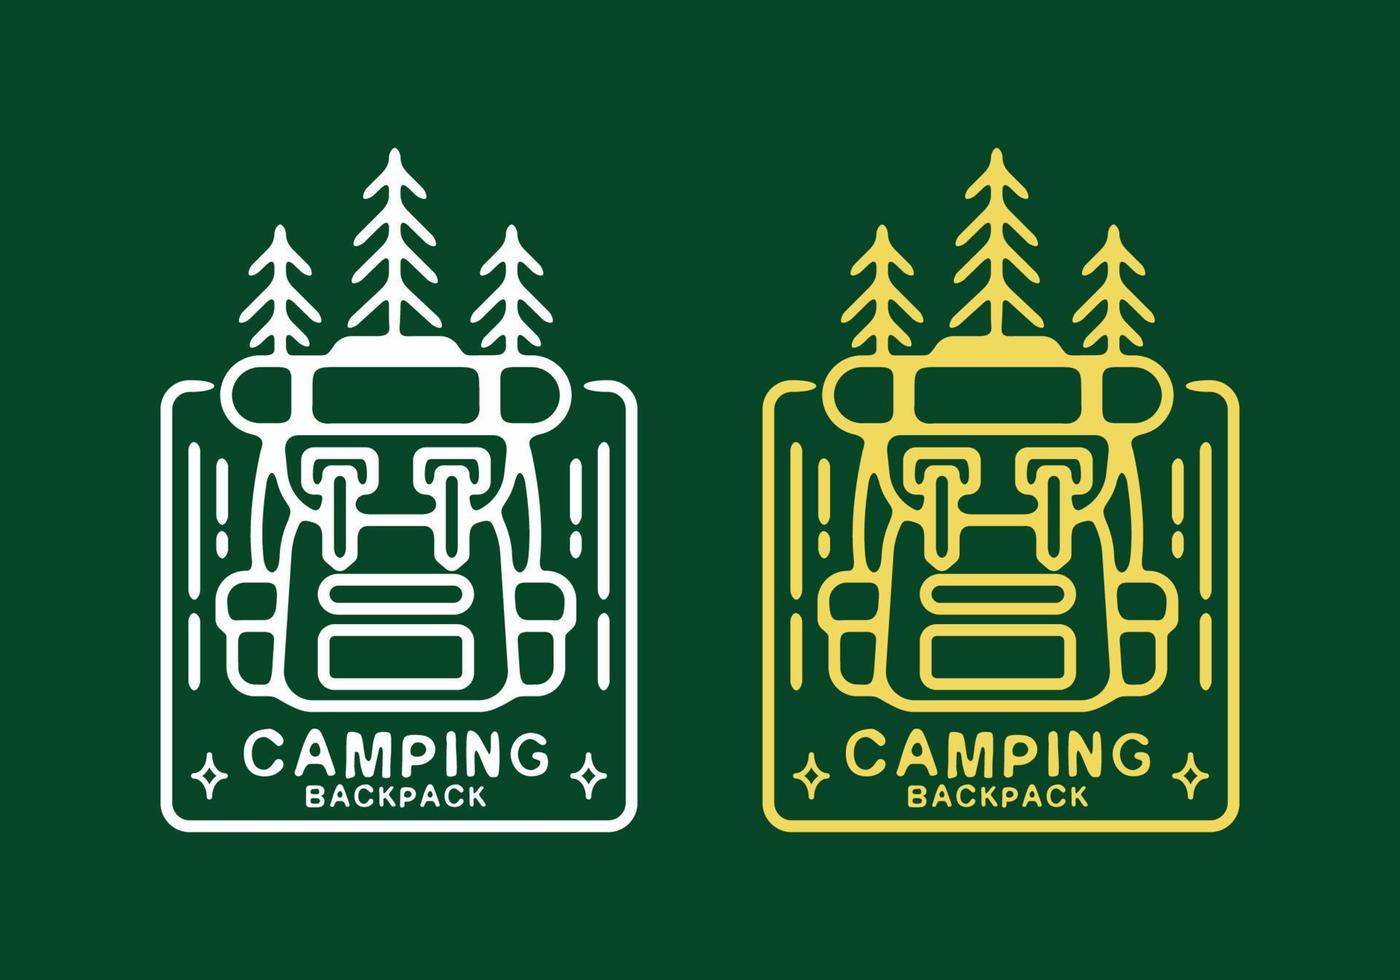 Line art illustration of camping backpack white and yellow color vector